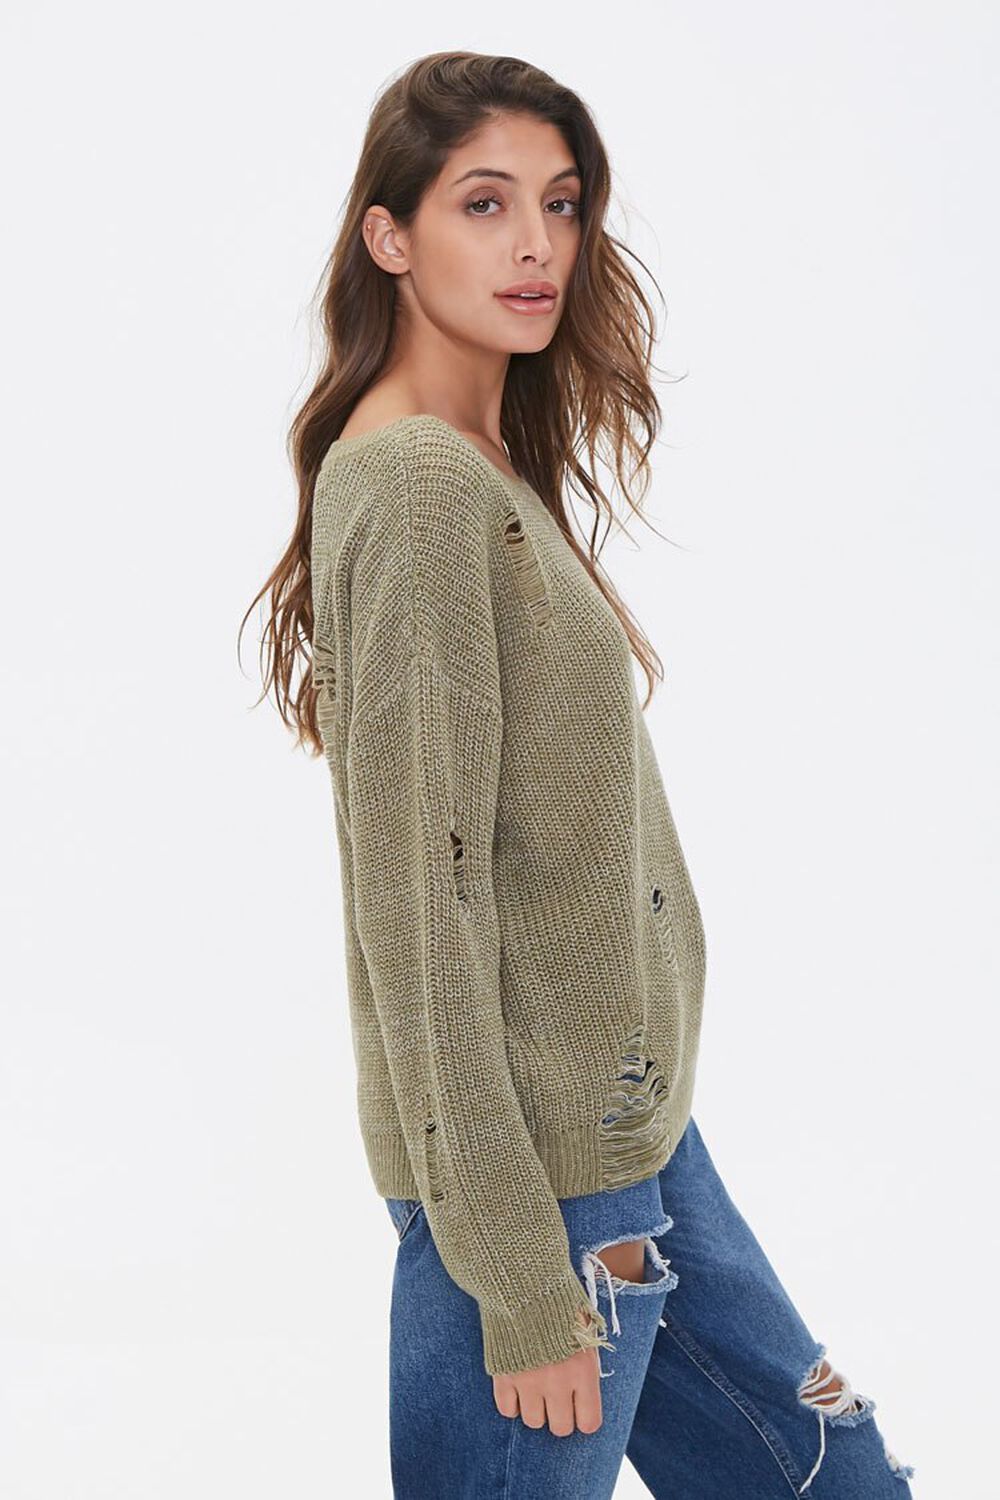 OLIVE Distressed Drop-Sleeve Sweater, image 2